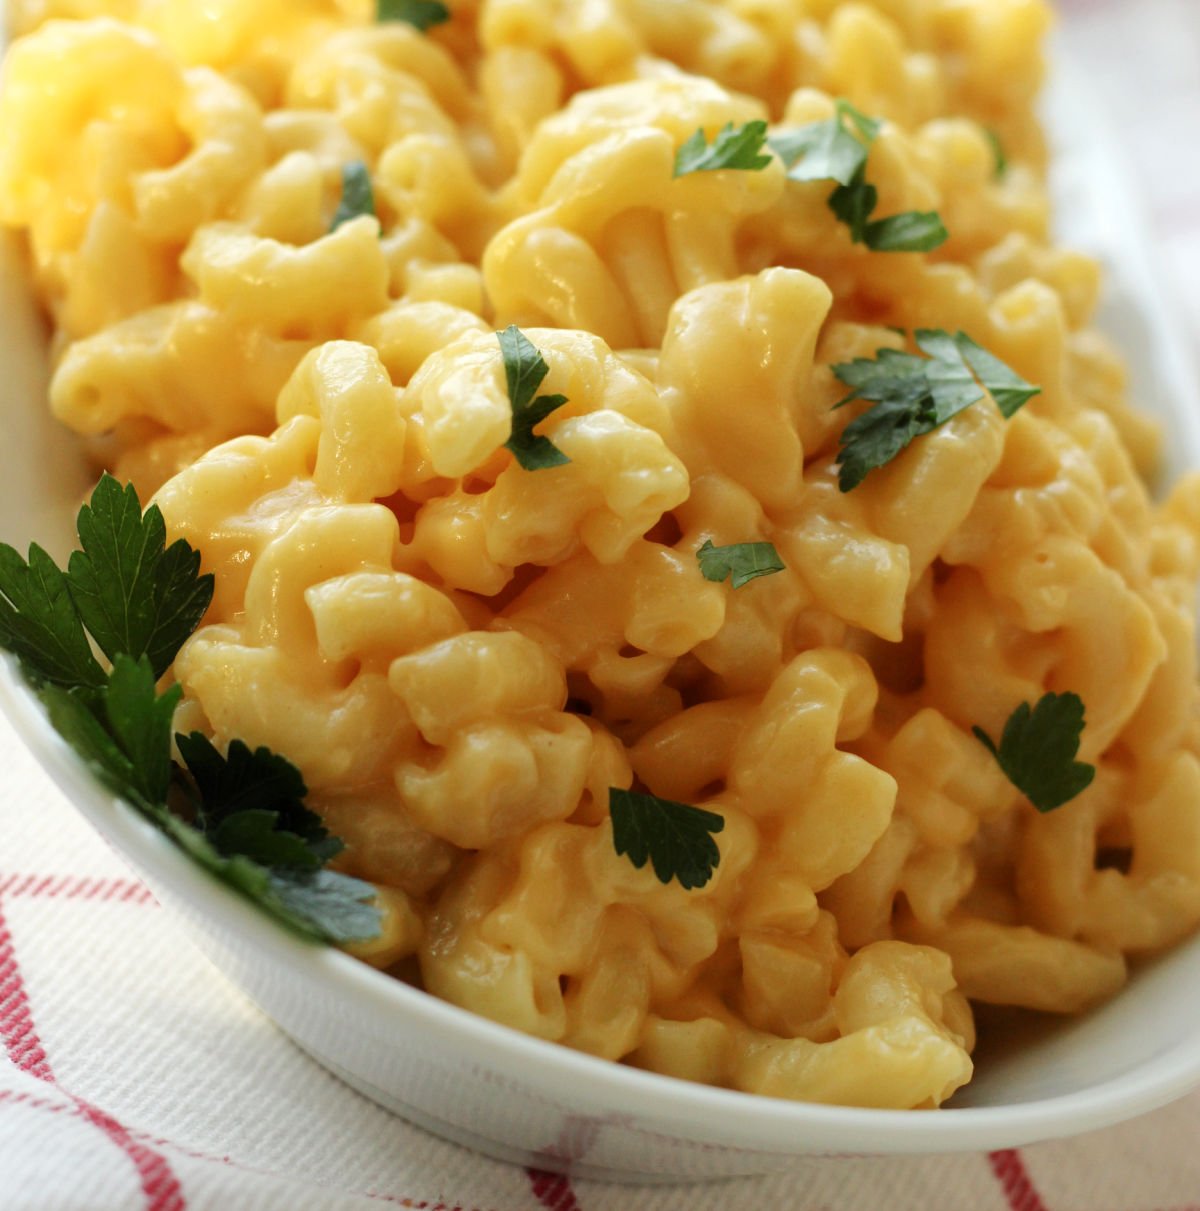 A plate of mac and cheese garnished with green parsley.